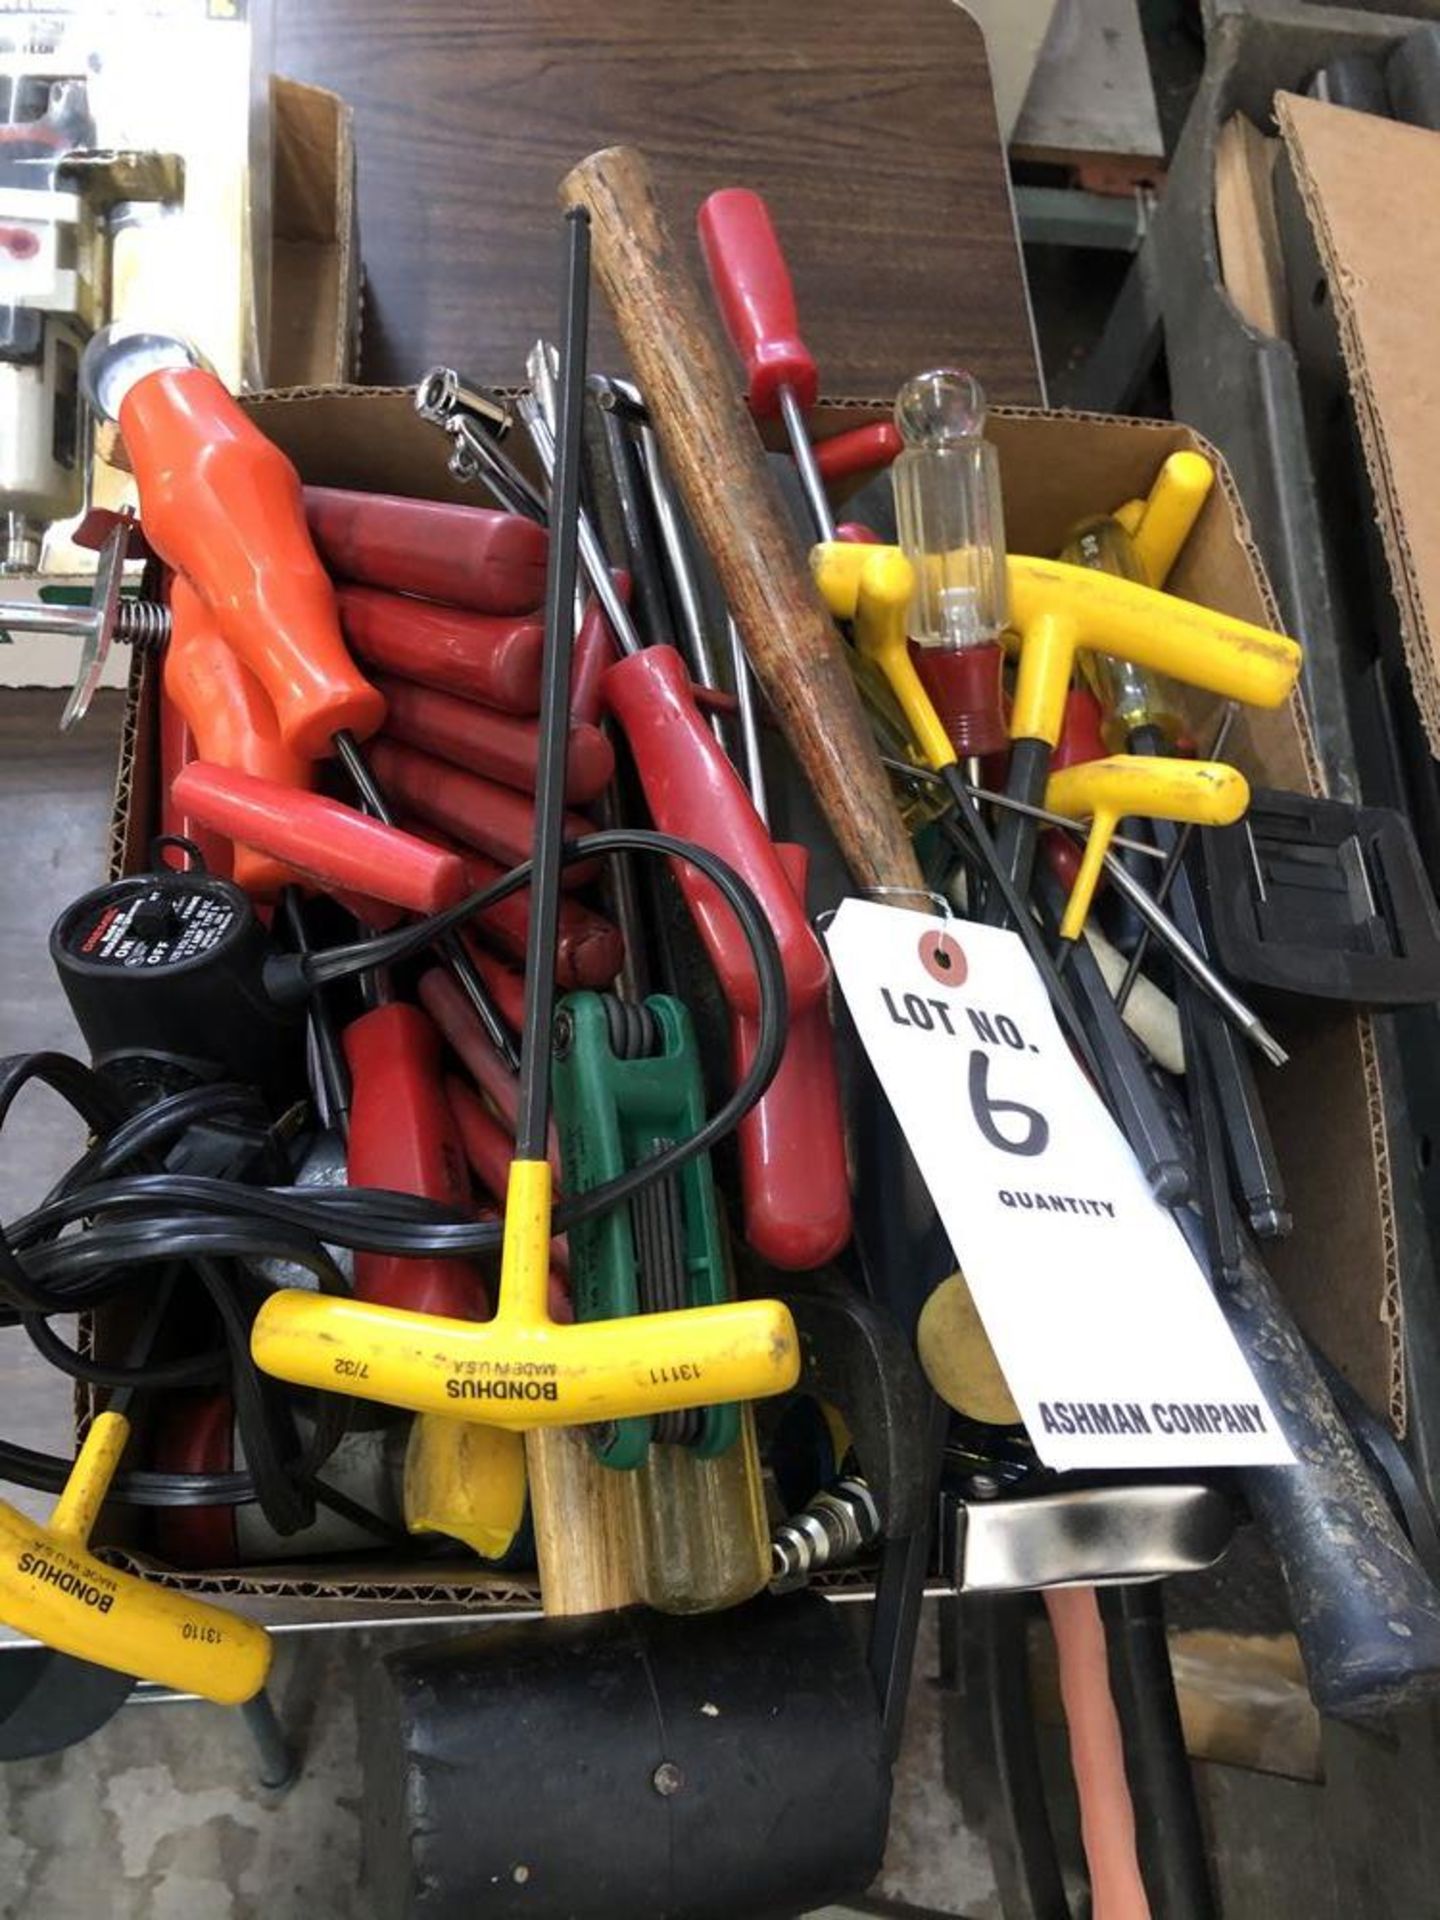 (LOT) MISC HAND TOOLS- ALLEN WRENCHES, T WRENCHES, HAMMERS, ENGRAVER, CAULKING GUN, SCREW DRIVERS